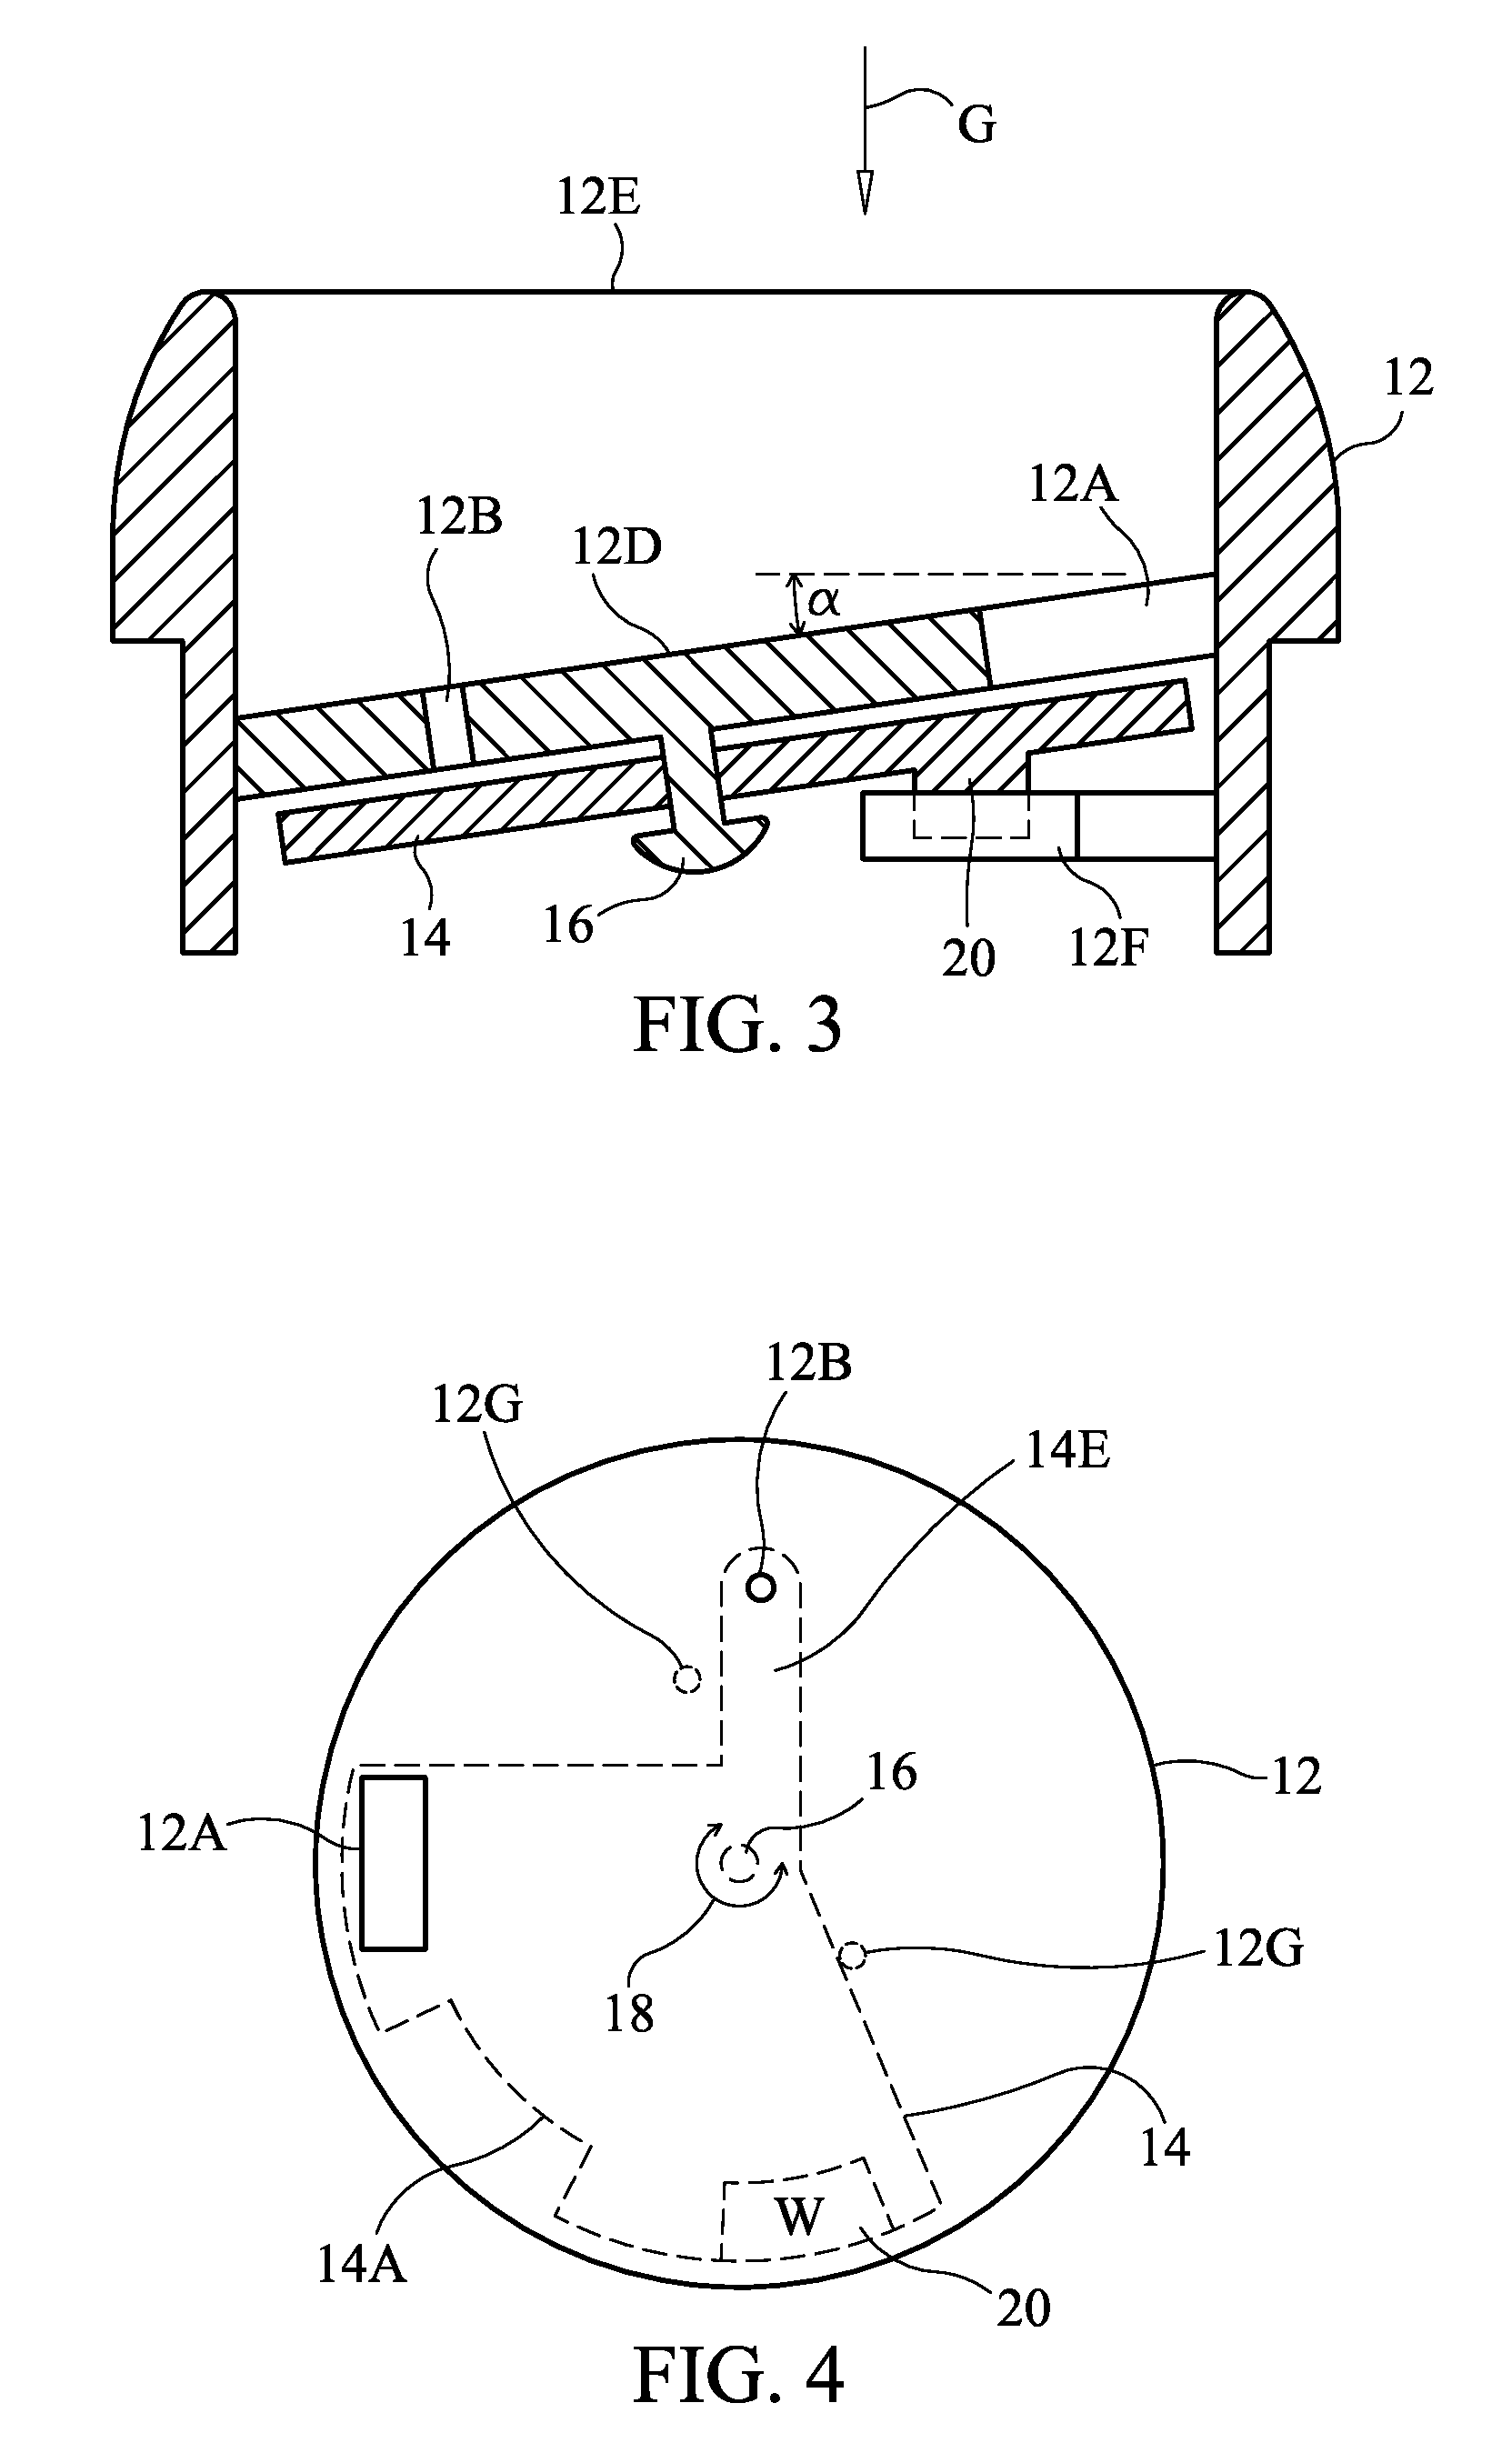 Cap system with automatic flow hole opening/closiing